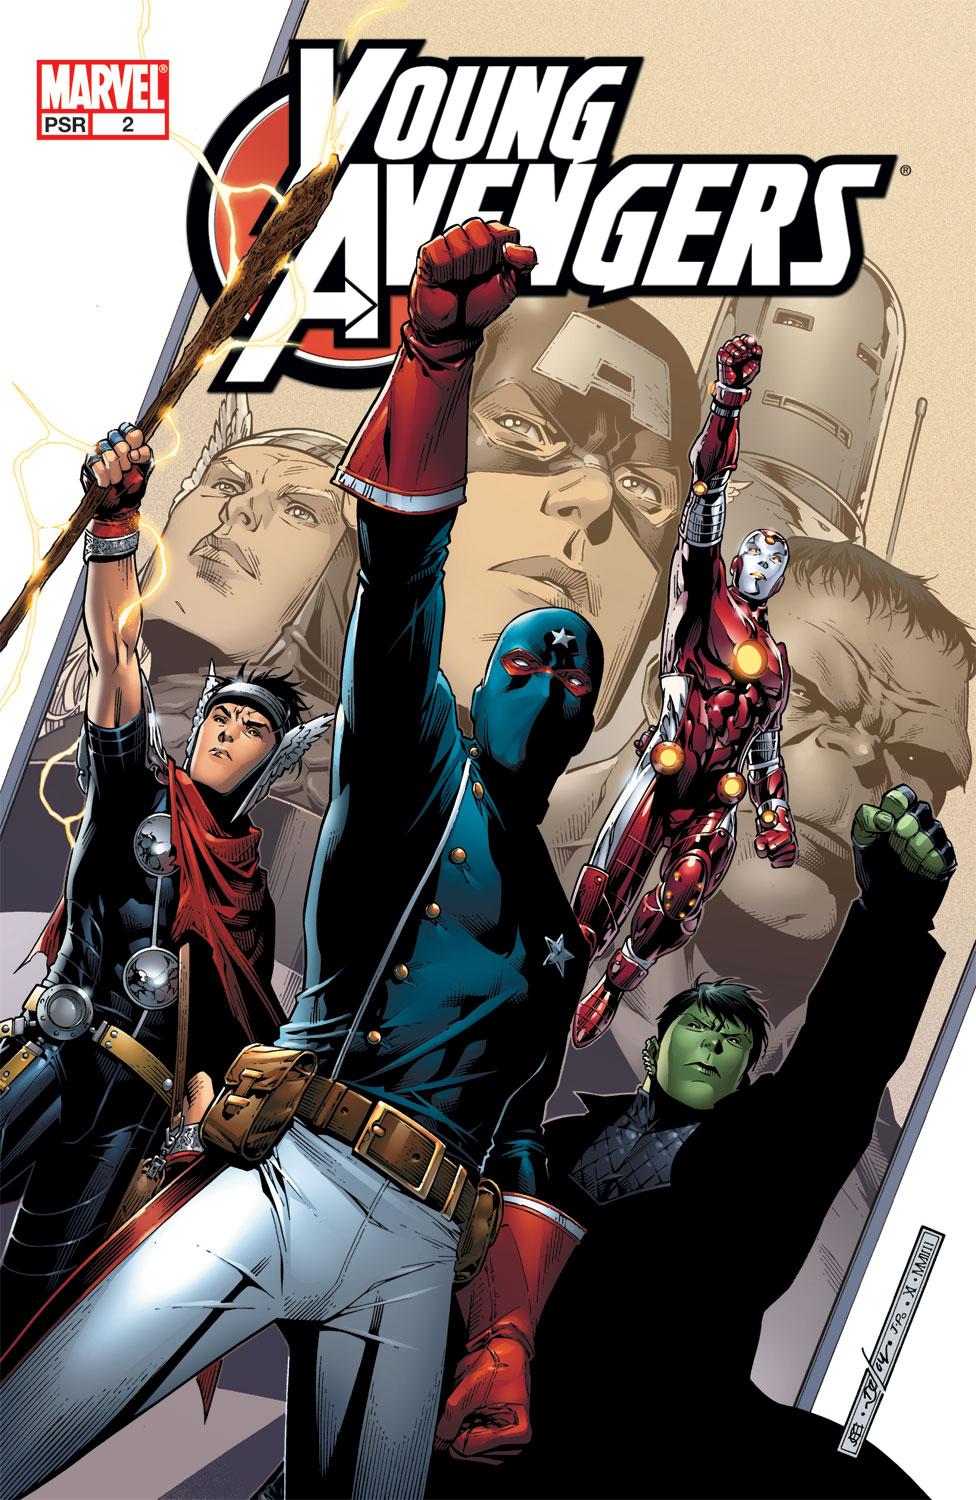 Young Avengers (2005) #2